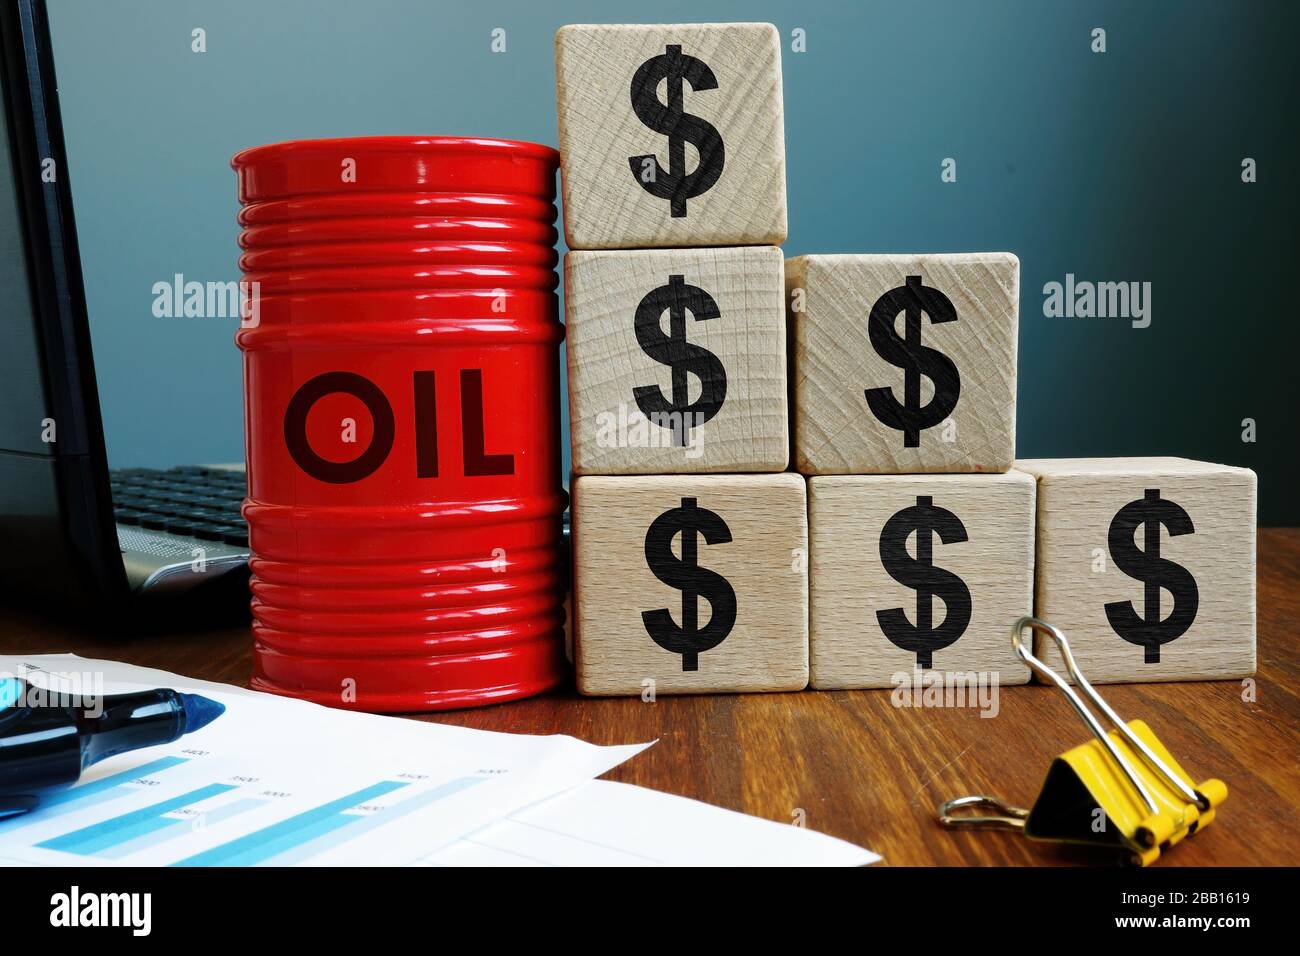 Falling oil price. Barrel and dollar signs. Stock Photo